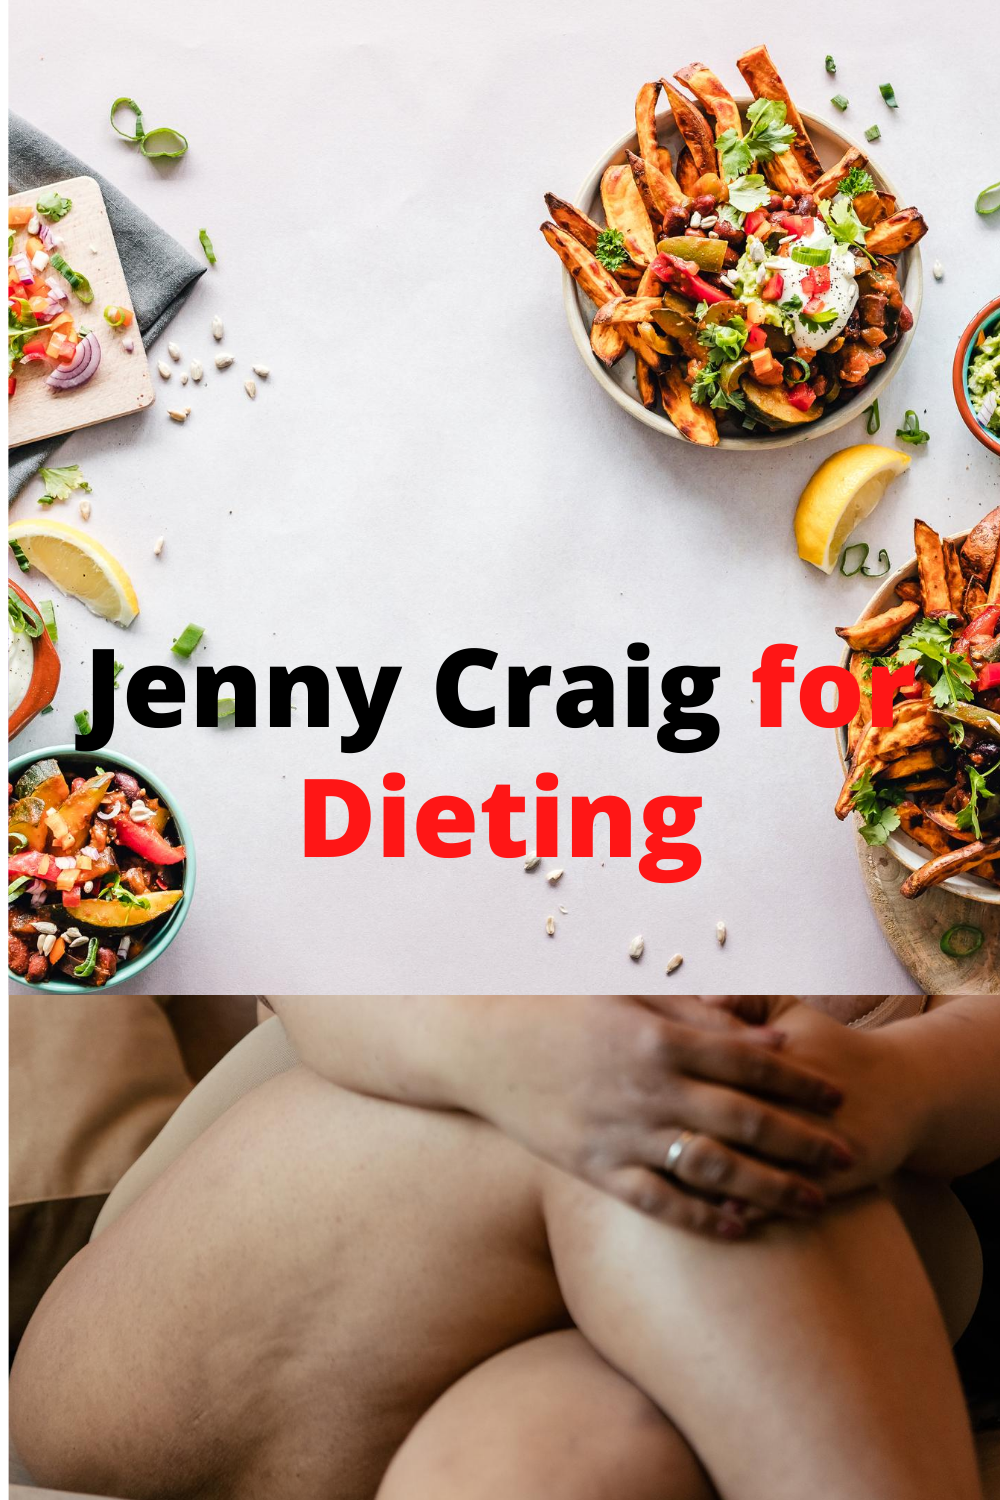 Jenny Craig for Dieting